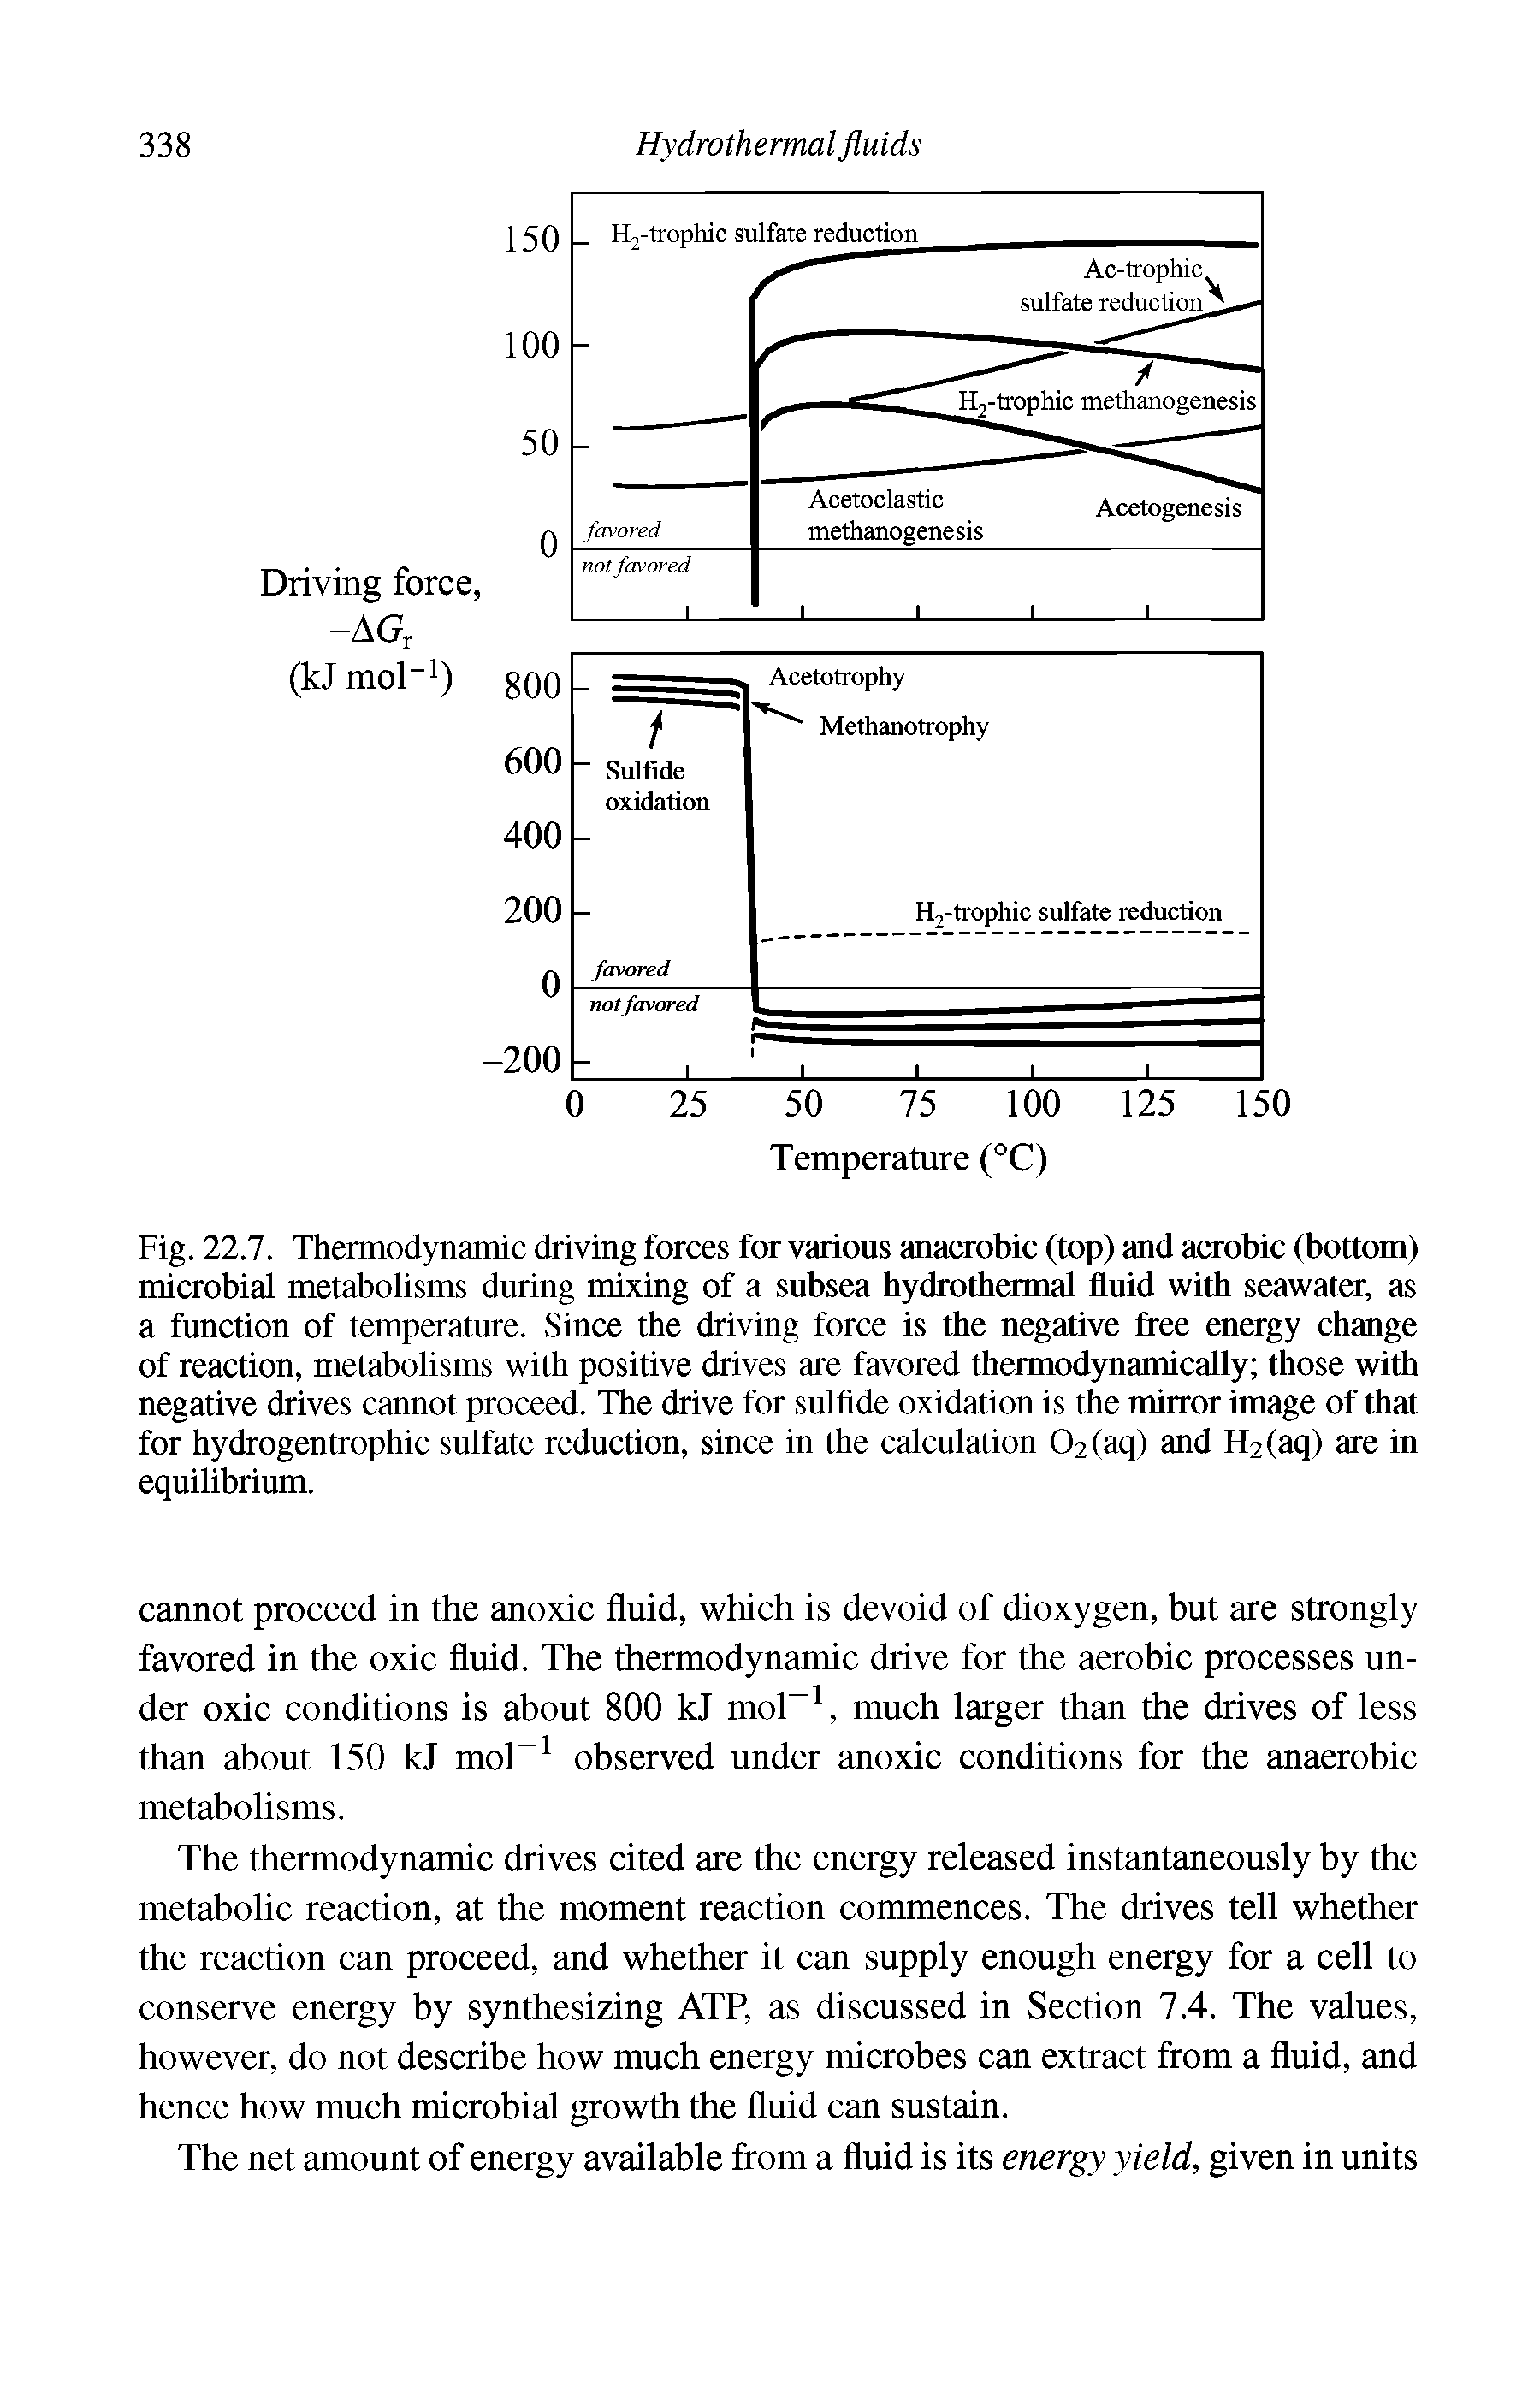 Fig. 22.7. Thermodynamic driving forces for various anaerobic (top) and aerobic (bottom) microbial metabolisms during mixing of a subsea hydrothermal fluid with seawater, as a function of temperature. Since the driving force is the negative free energy change of reaction, metabolisms with positive drives are favored thermodynamically those with negative drives cannot proceed. The drive for sulfide oxidation is the mirror image of that for hydrogentrophic sulfate reduction, since in the calculation 02(aq) and H2(aq) are in equilibrium.